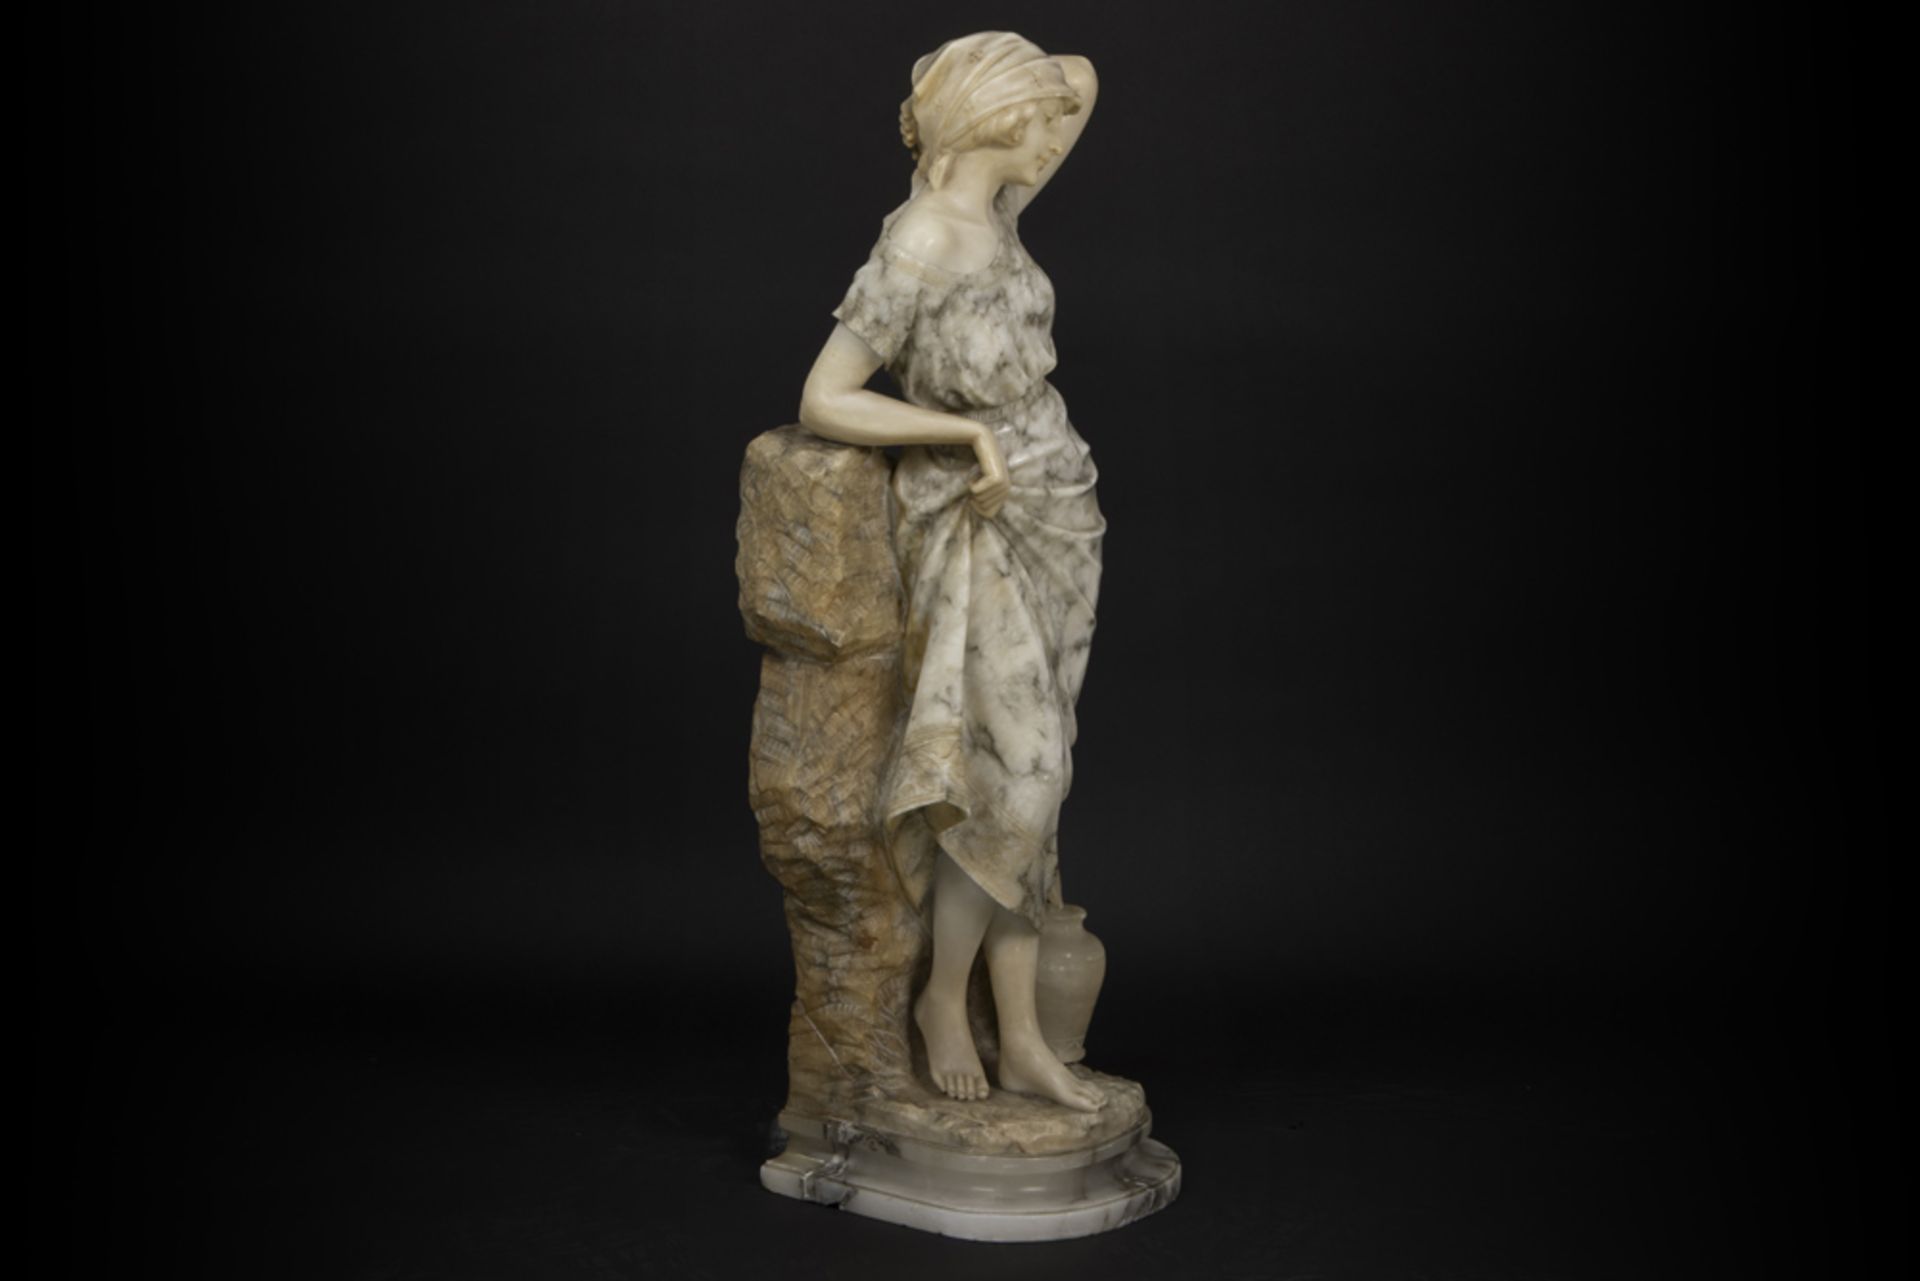 19th Cent. Italian sculpture in marble and alabaster - signed Trafely & Sardelli || TRAFELY & - Image 2 of 5